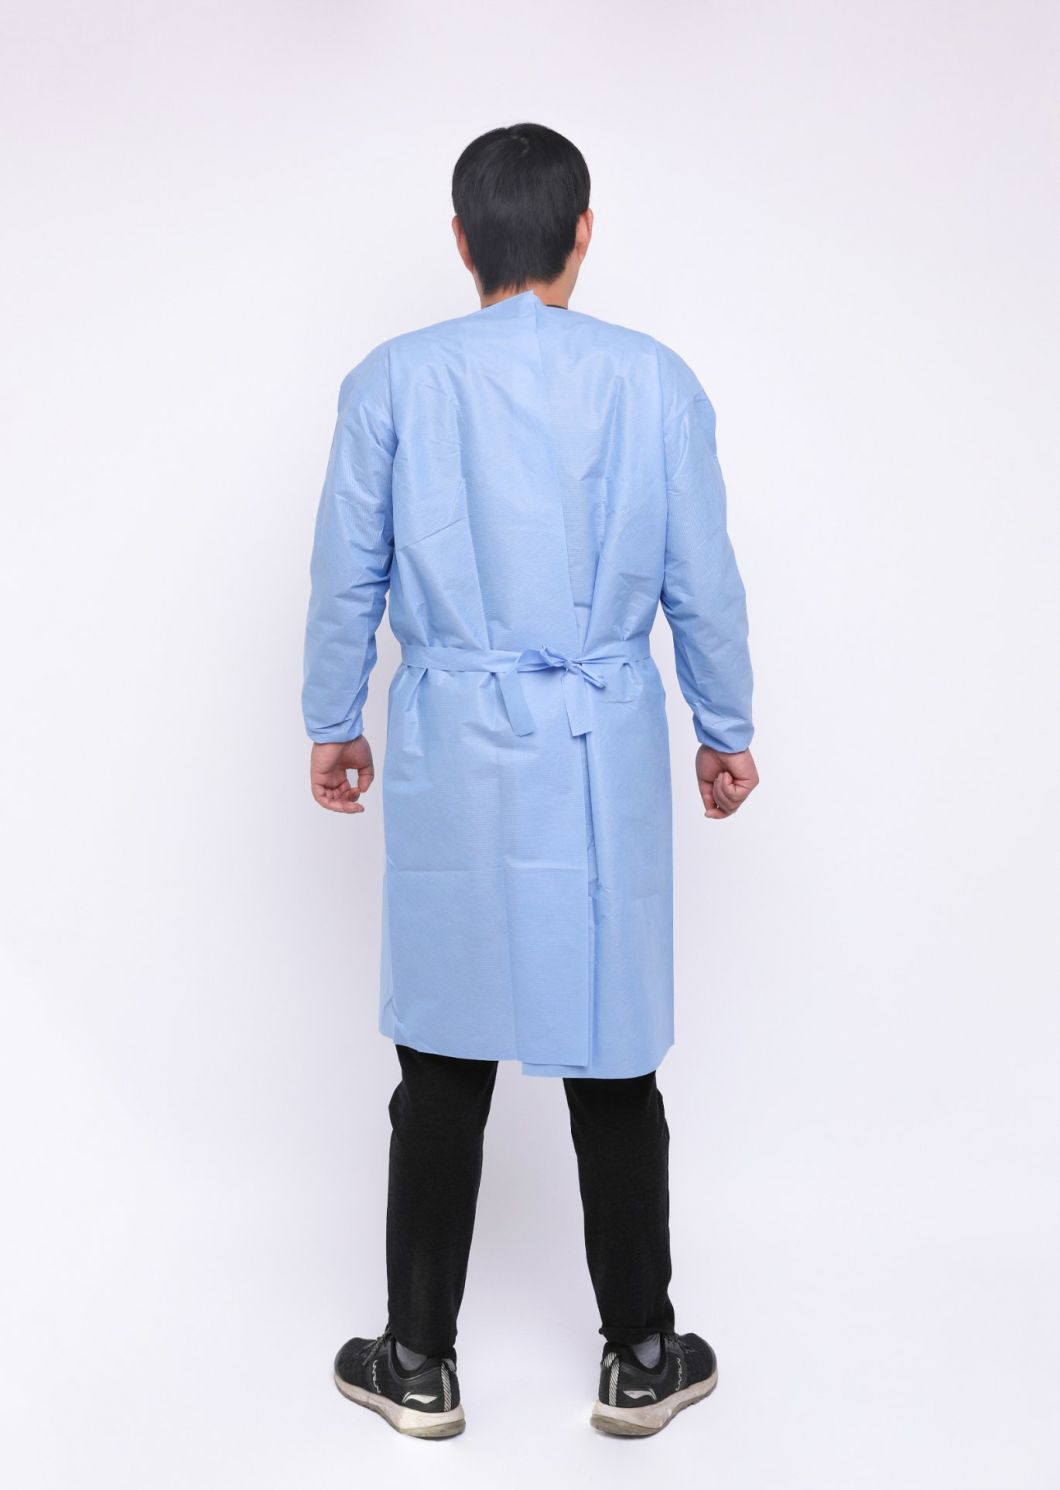 Hot Sale Medical Protective Clothing Isolation Clothing Blocking Bacteria and Viruses Civil Protective Clothing